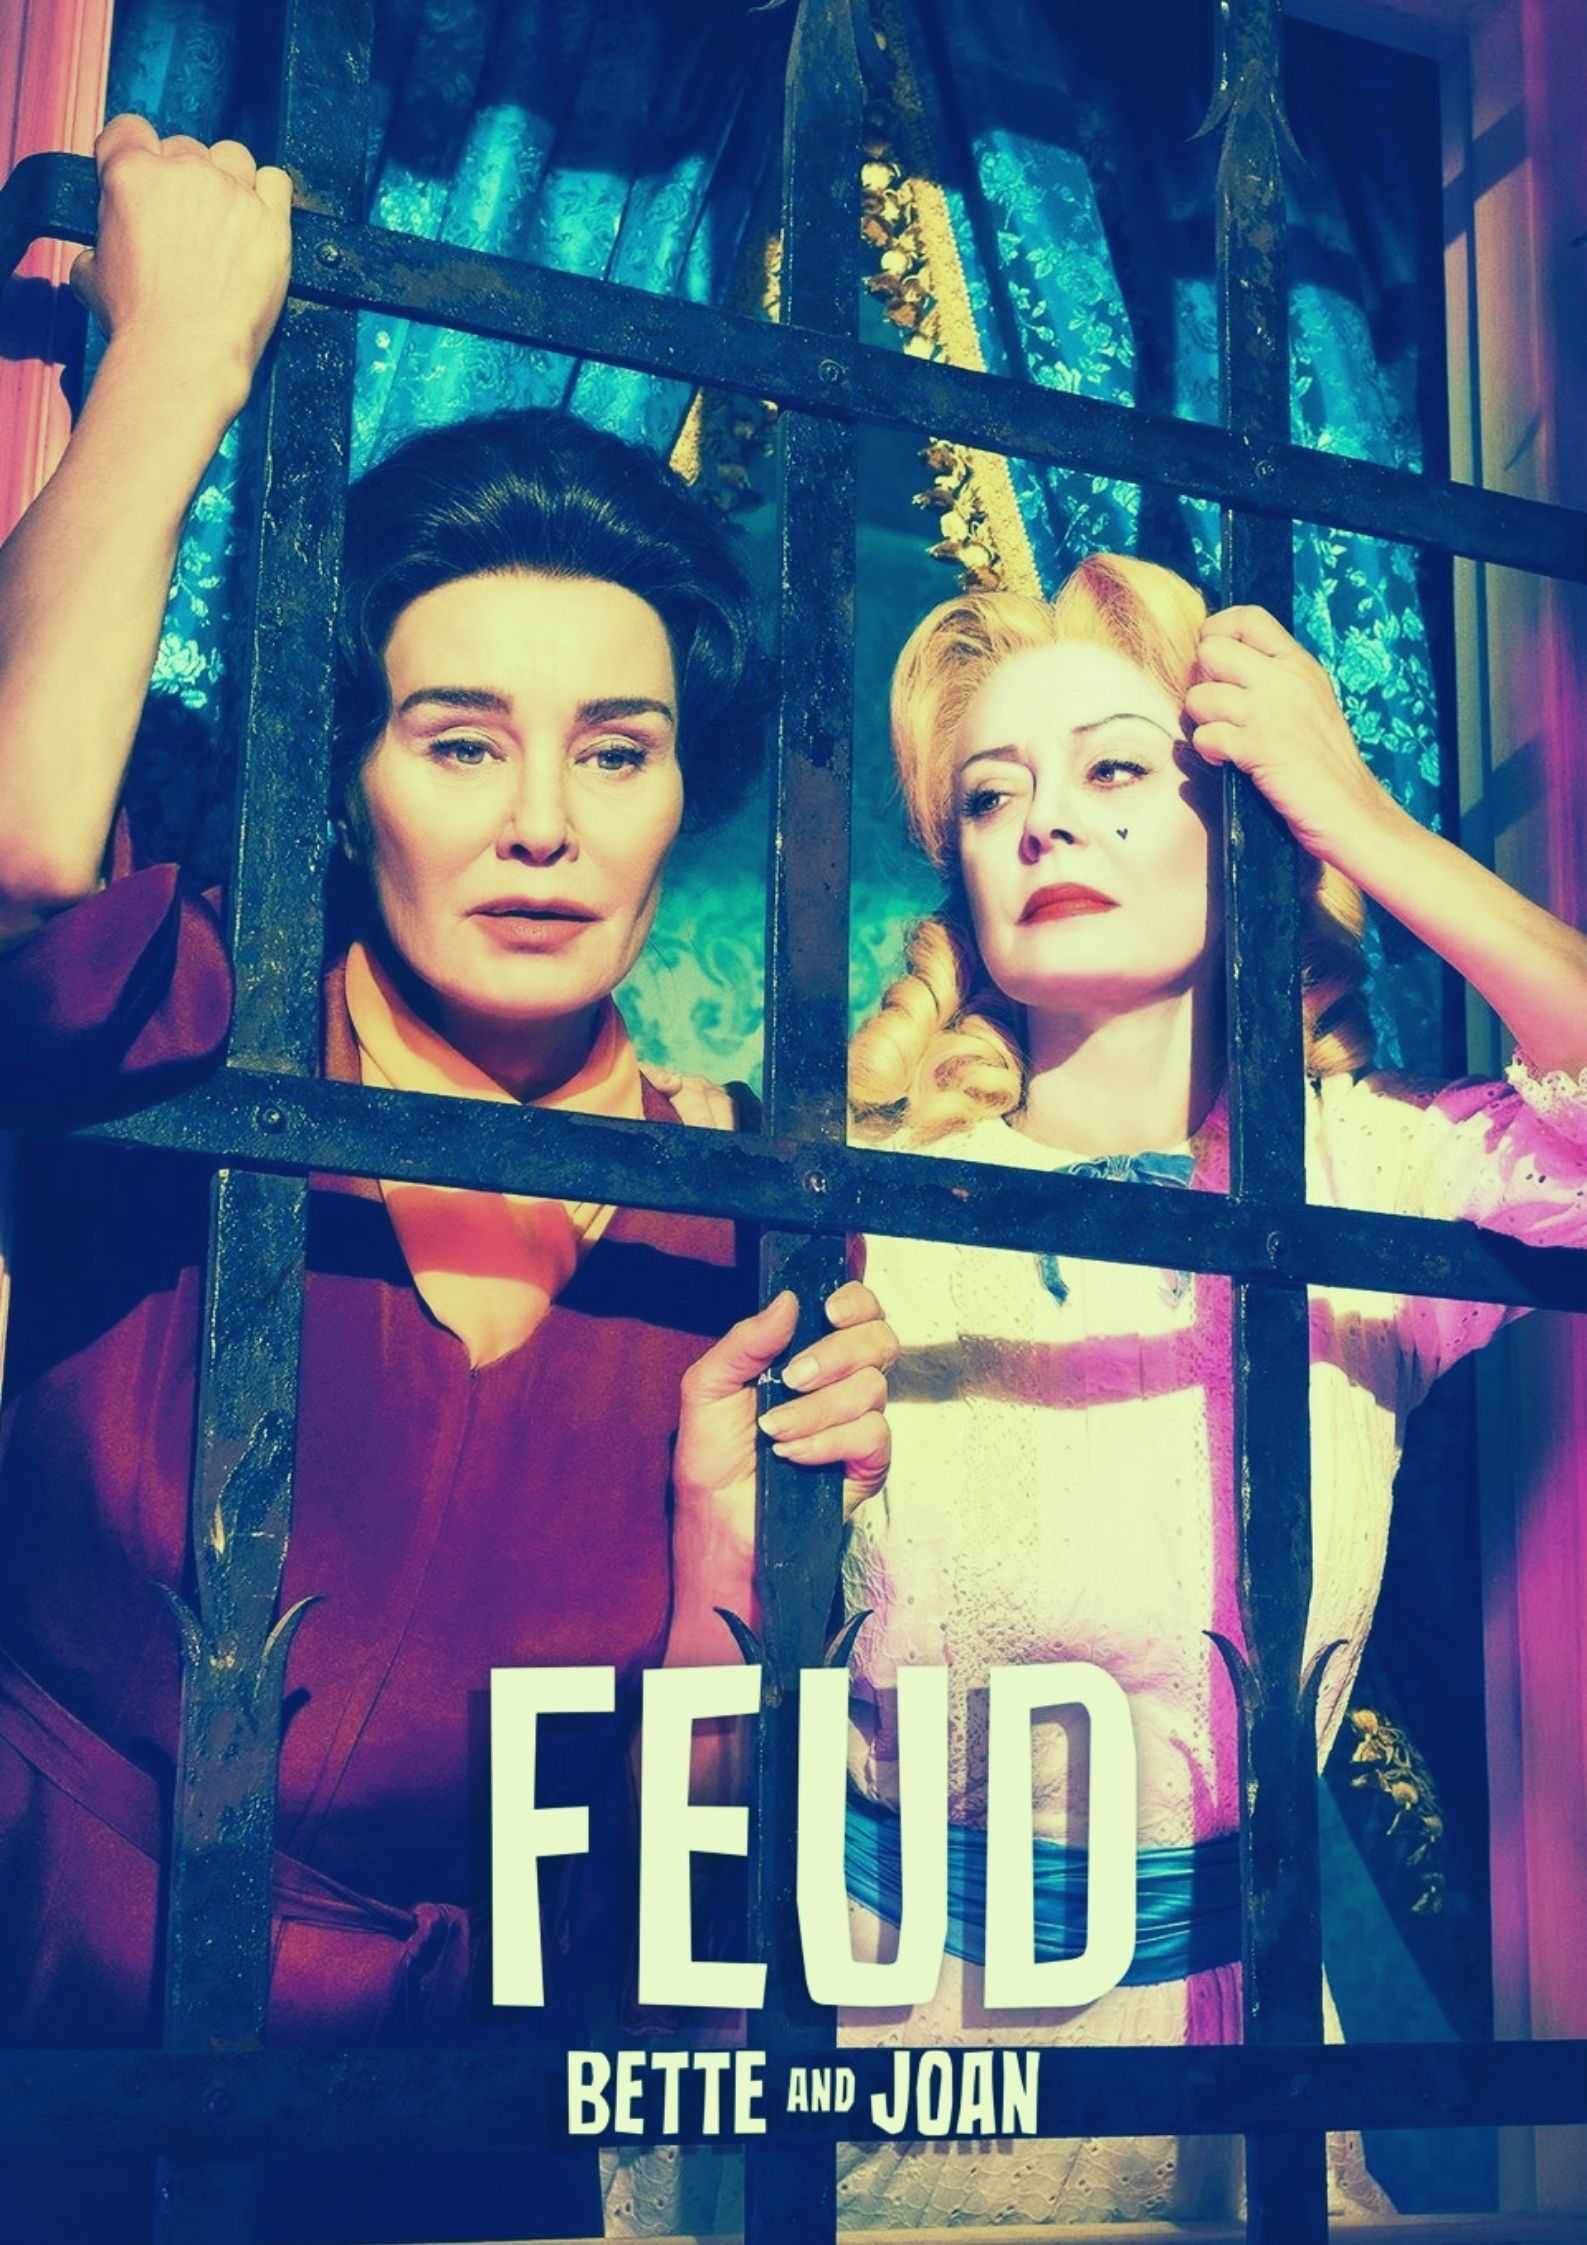 Feud: Bette and Joan Parents Guide | Feud: Bette and Joan Age Rating 2017